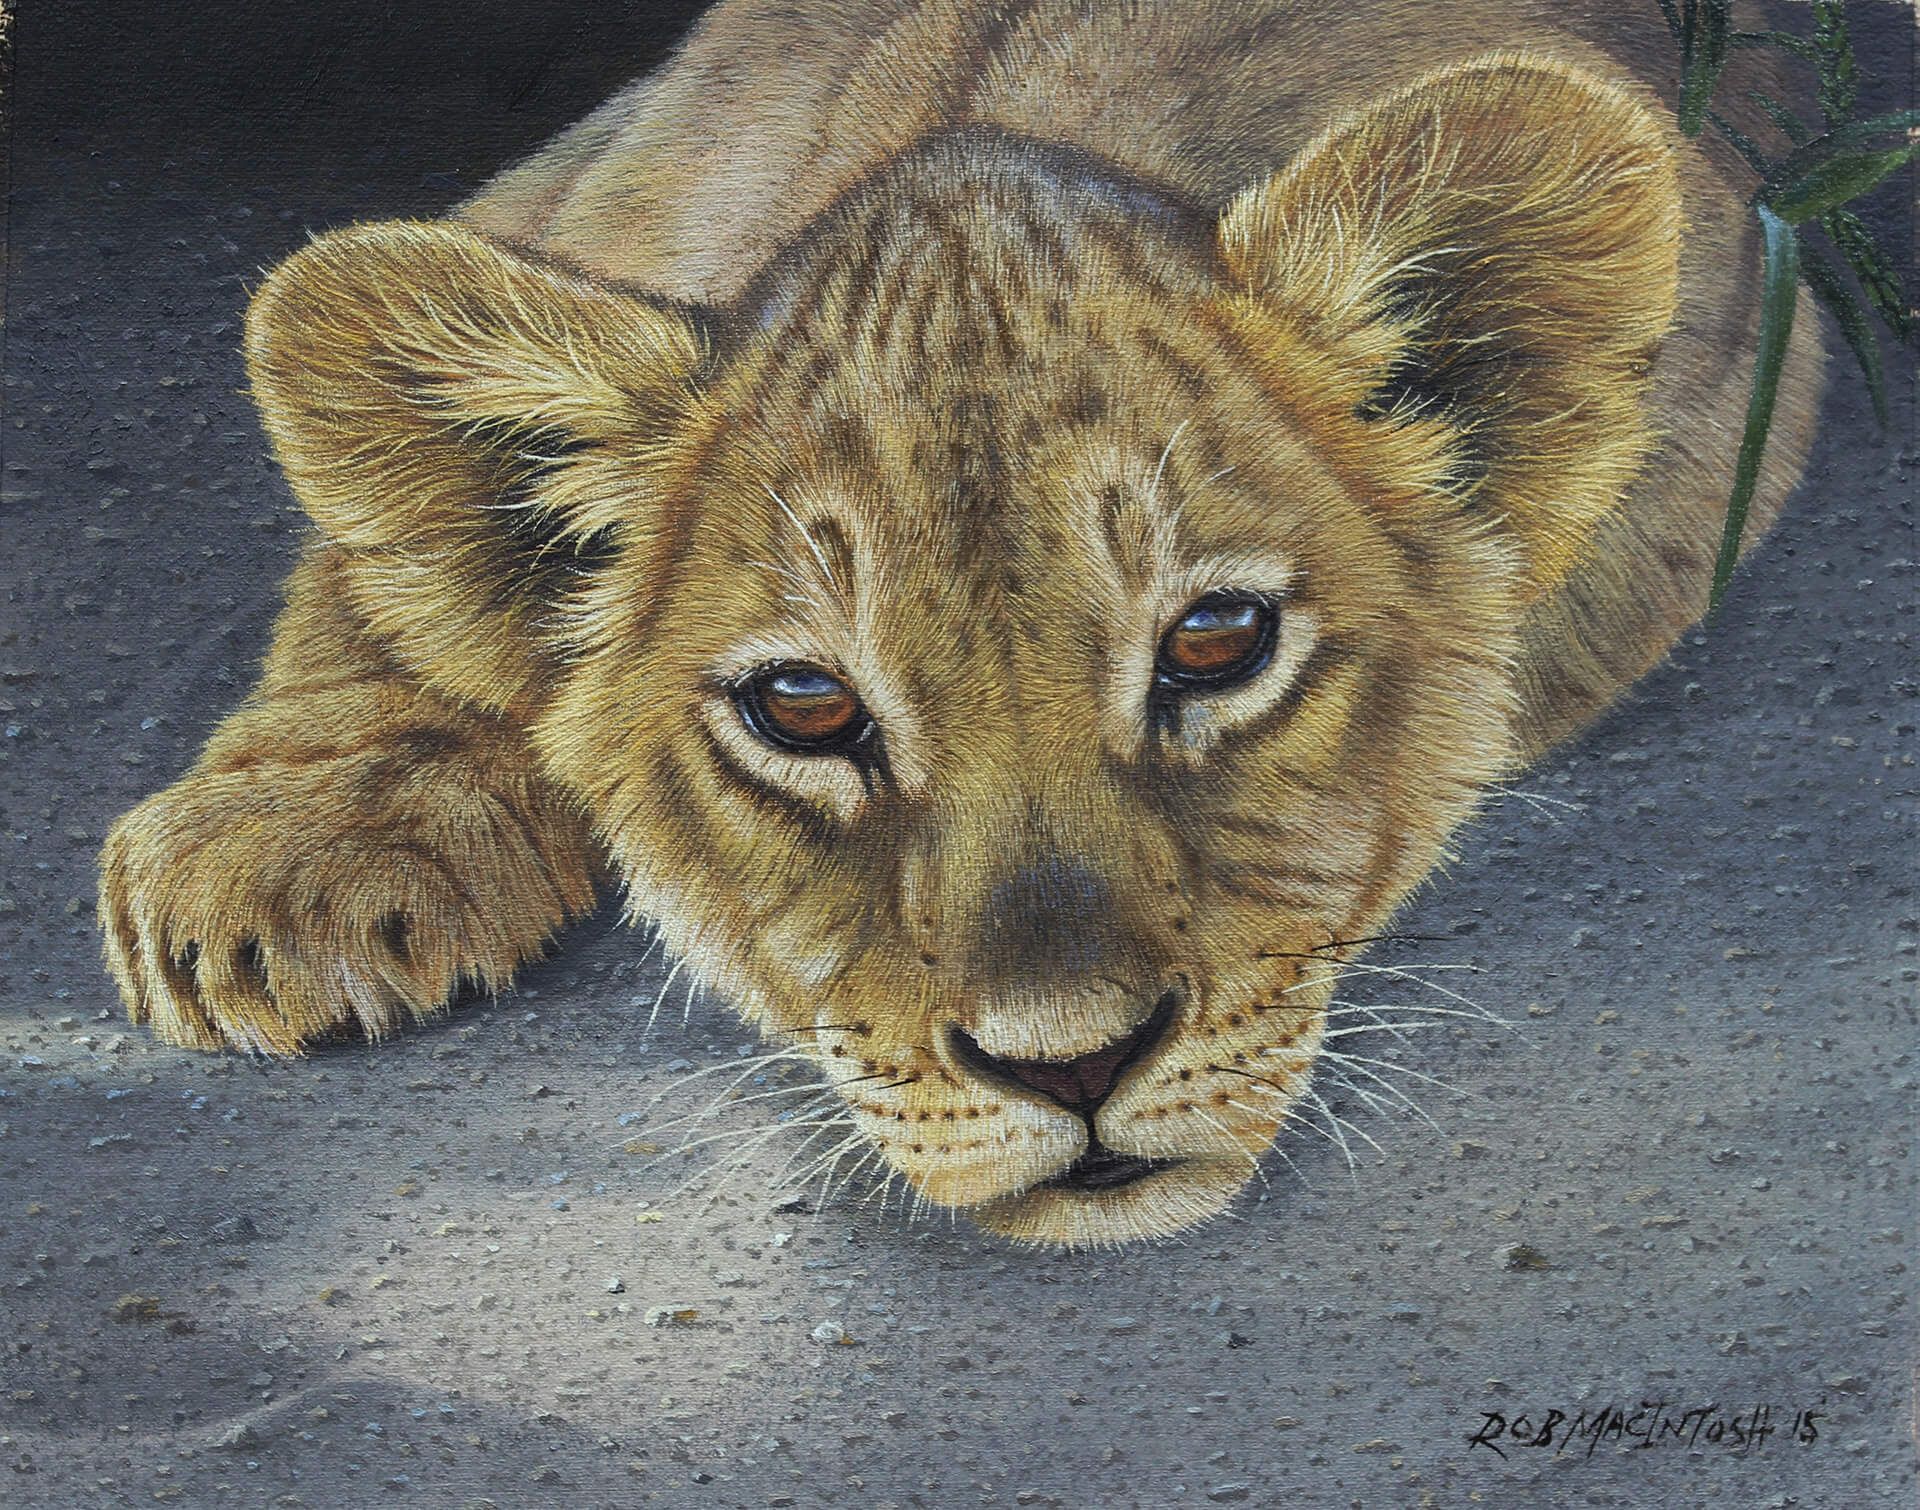 Photorealistic painting of a lion cub